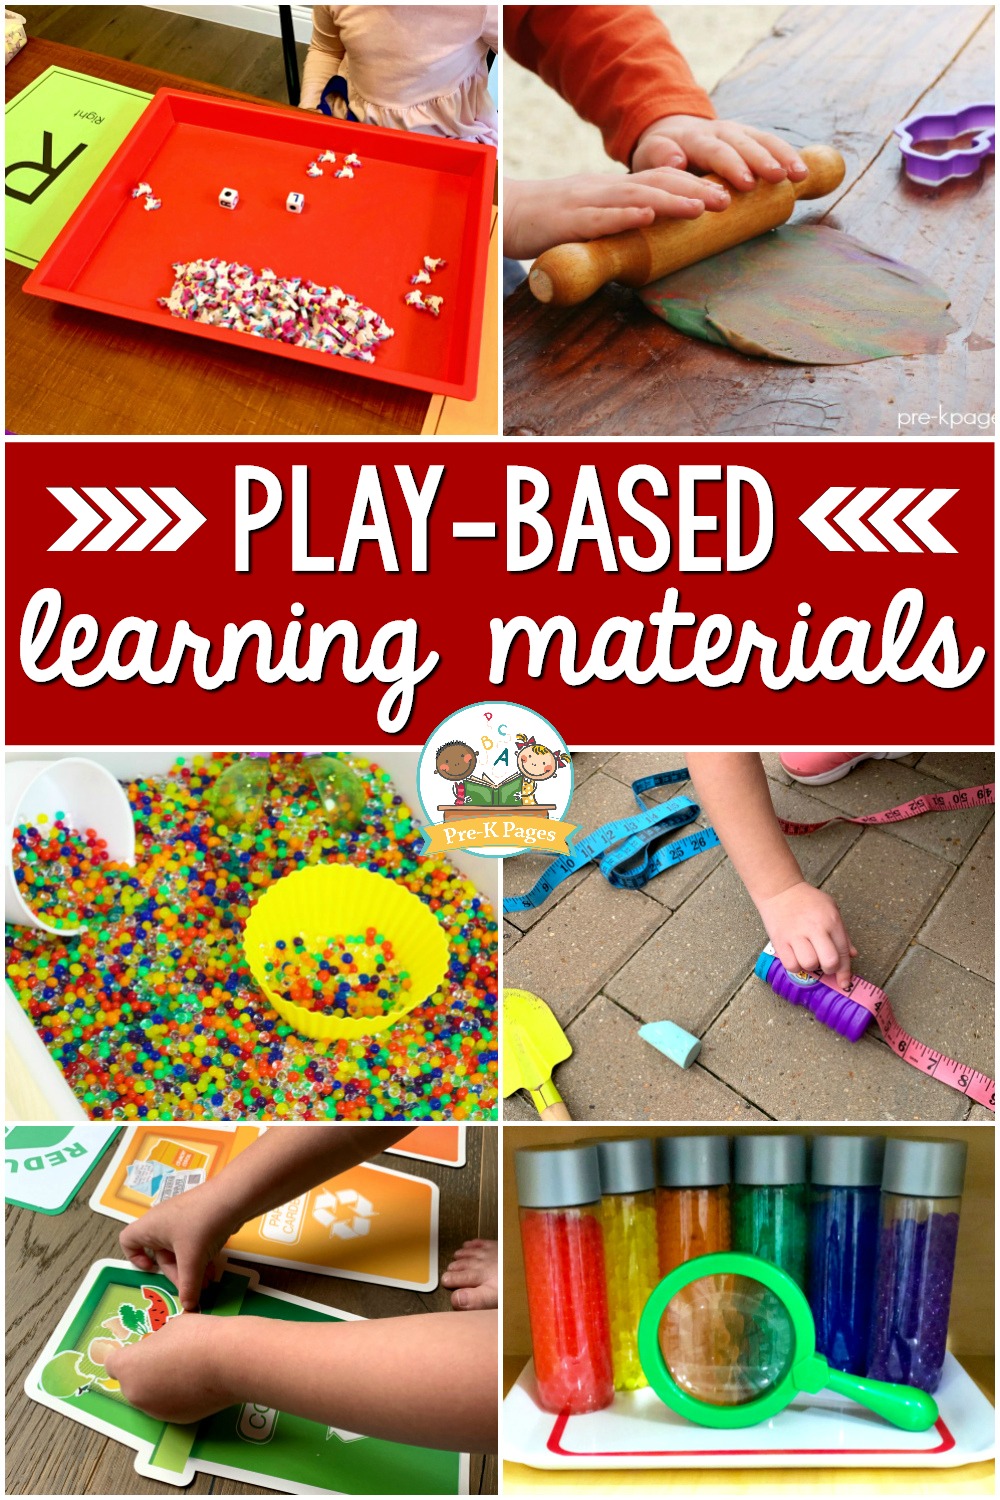 Play Based Learning Materials for preschool